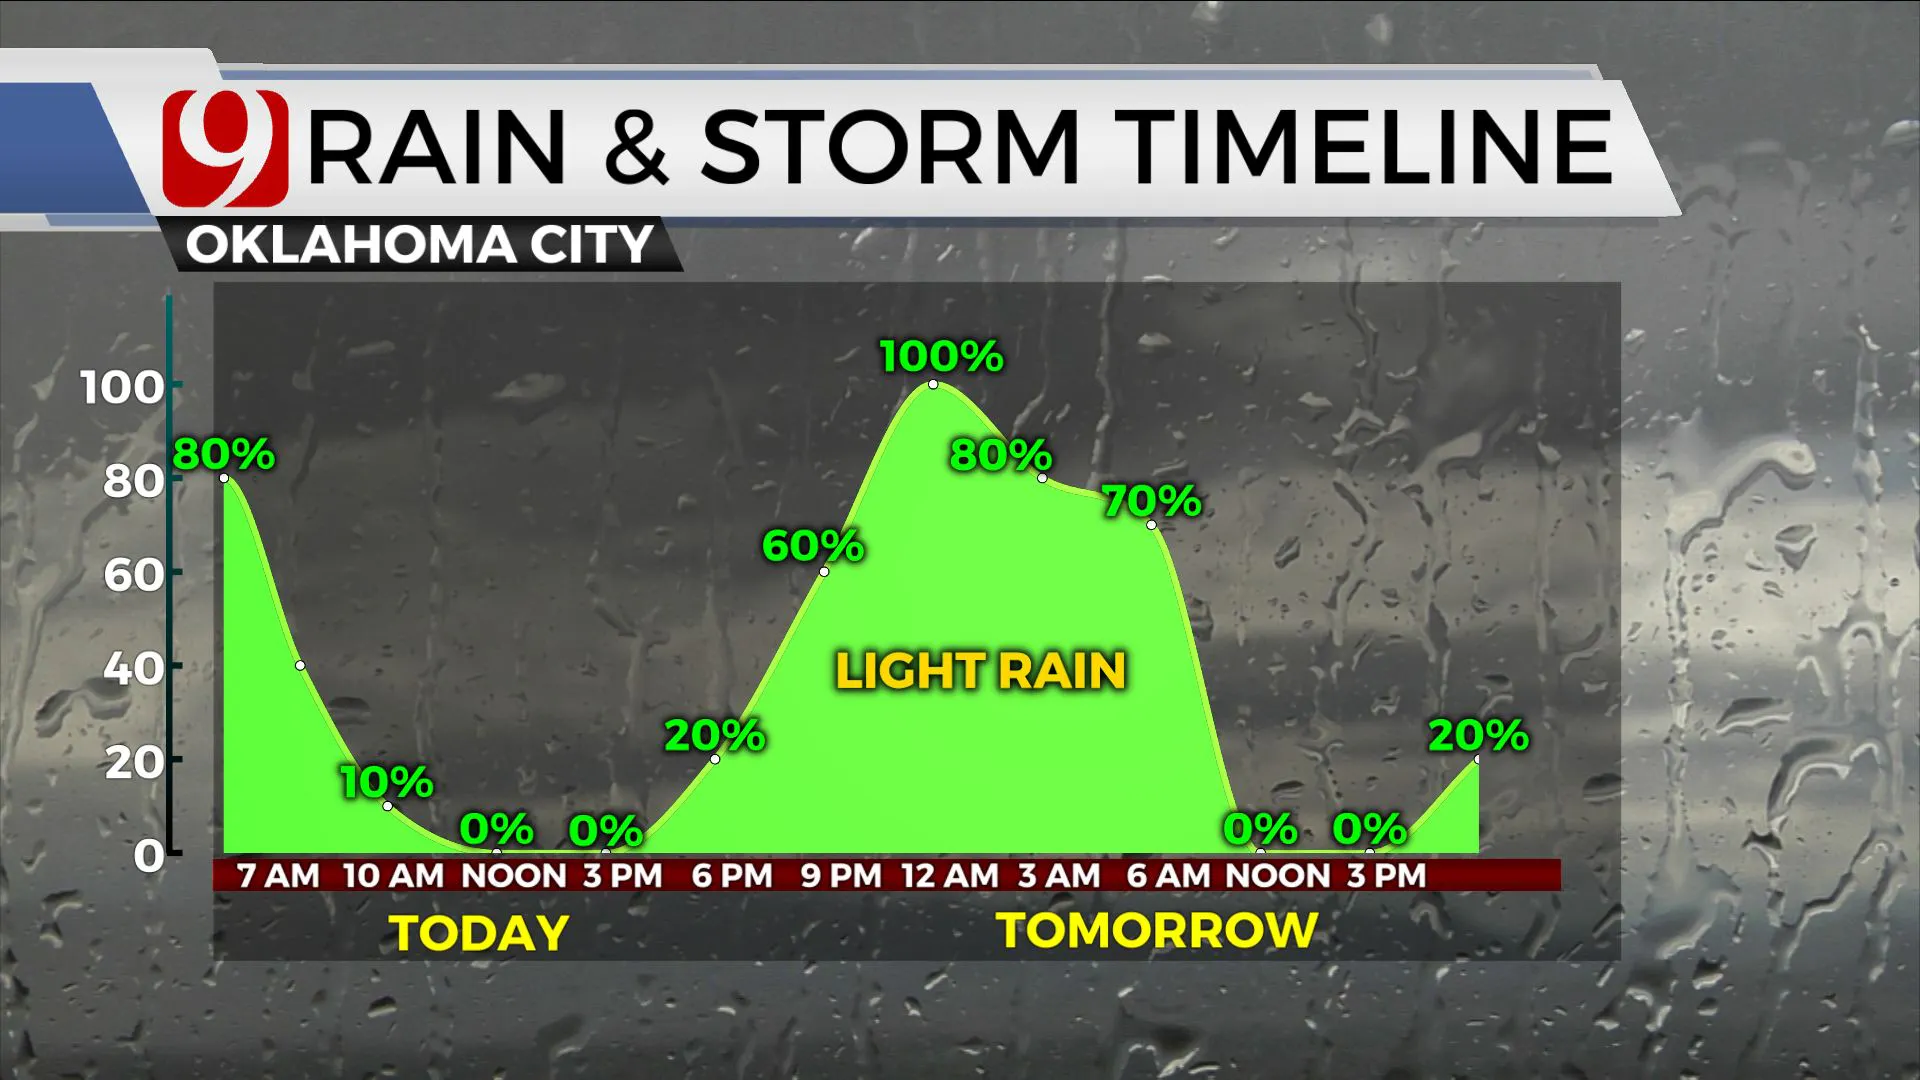 Rain and storm timeline today.